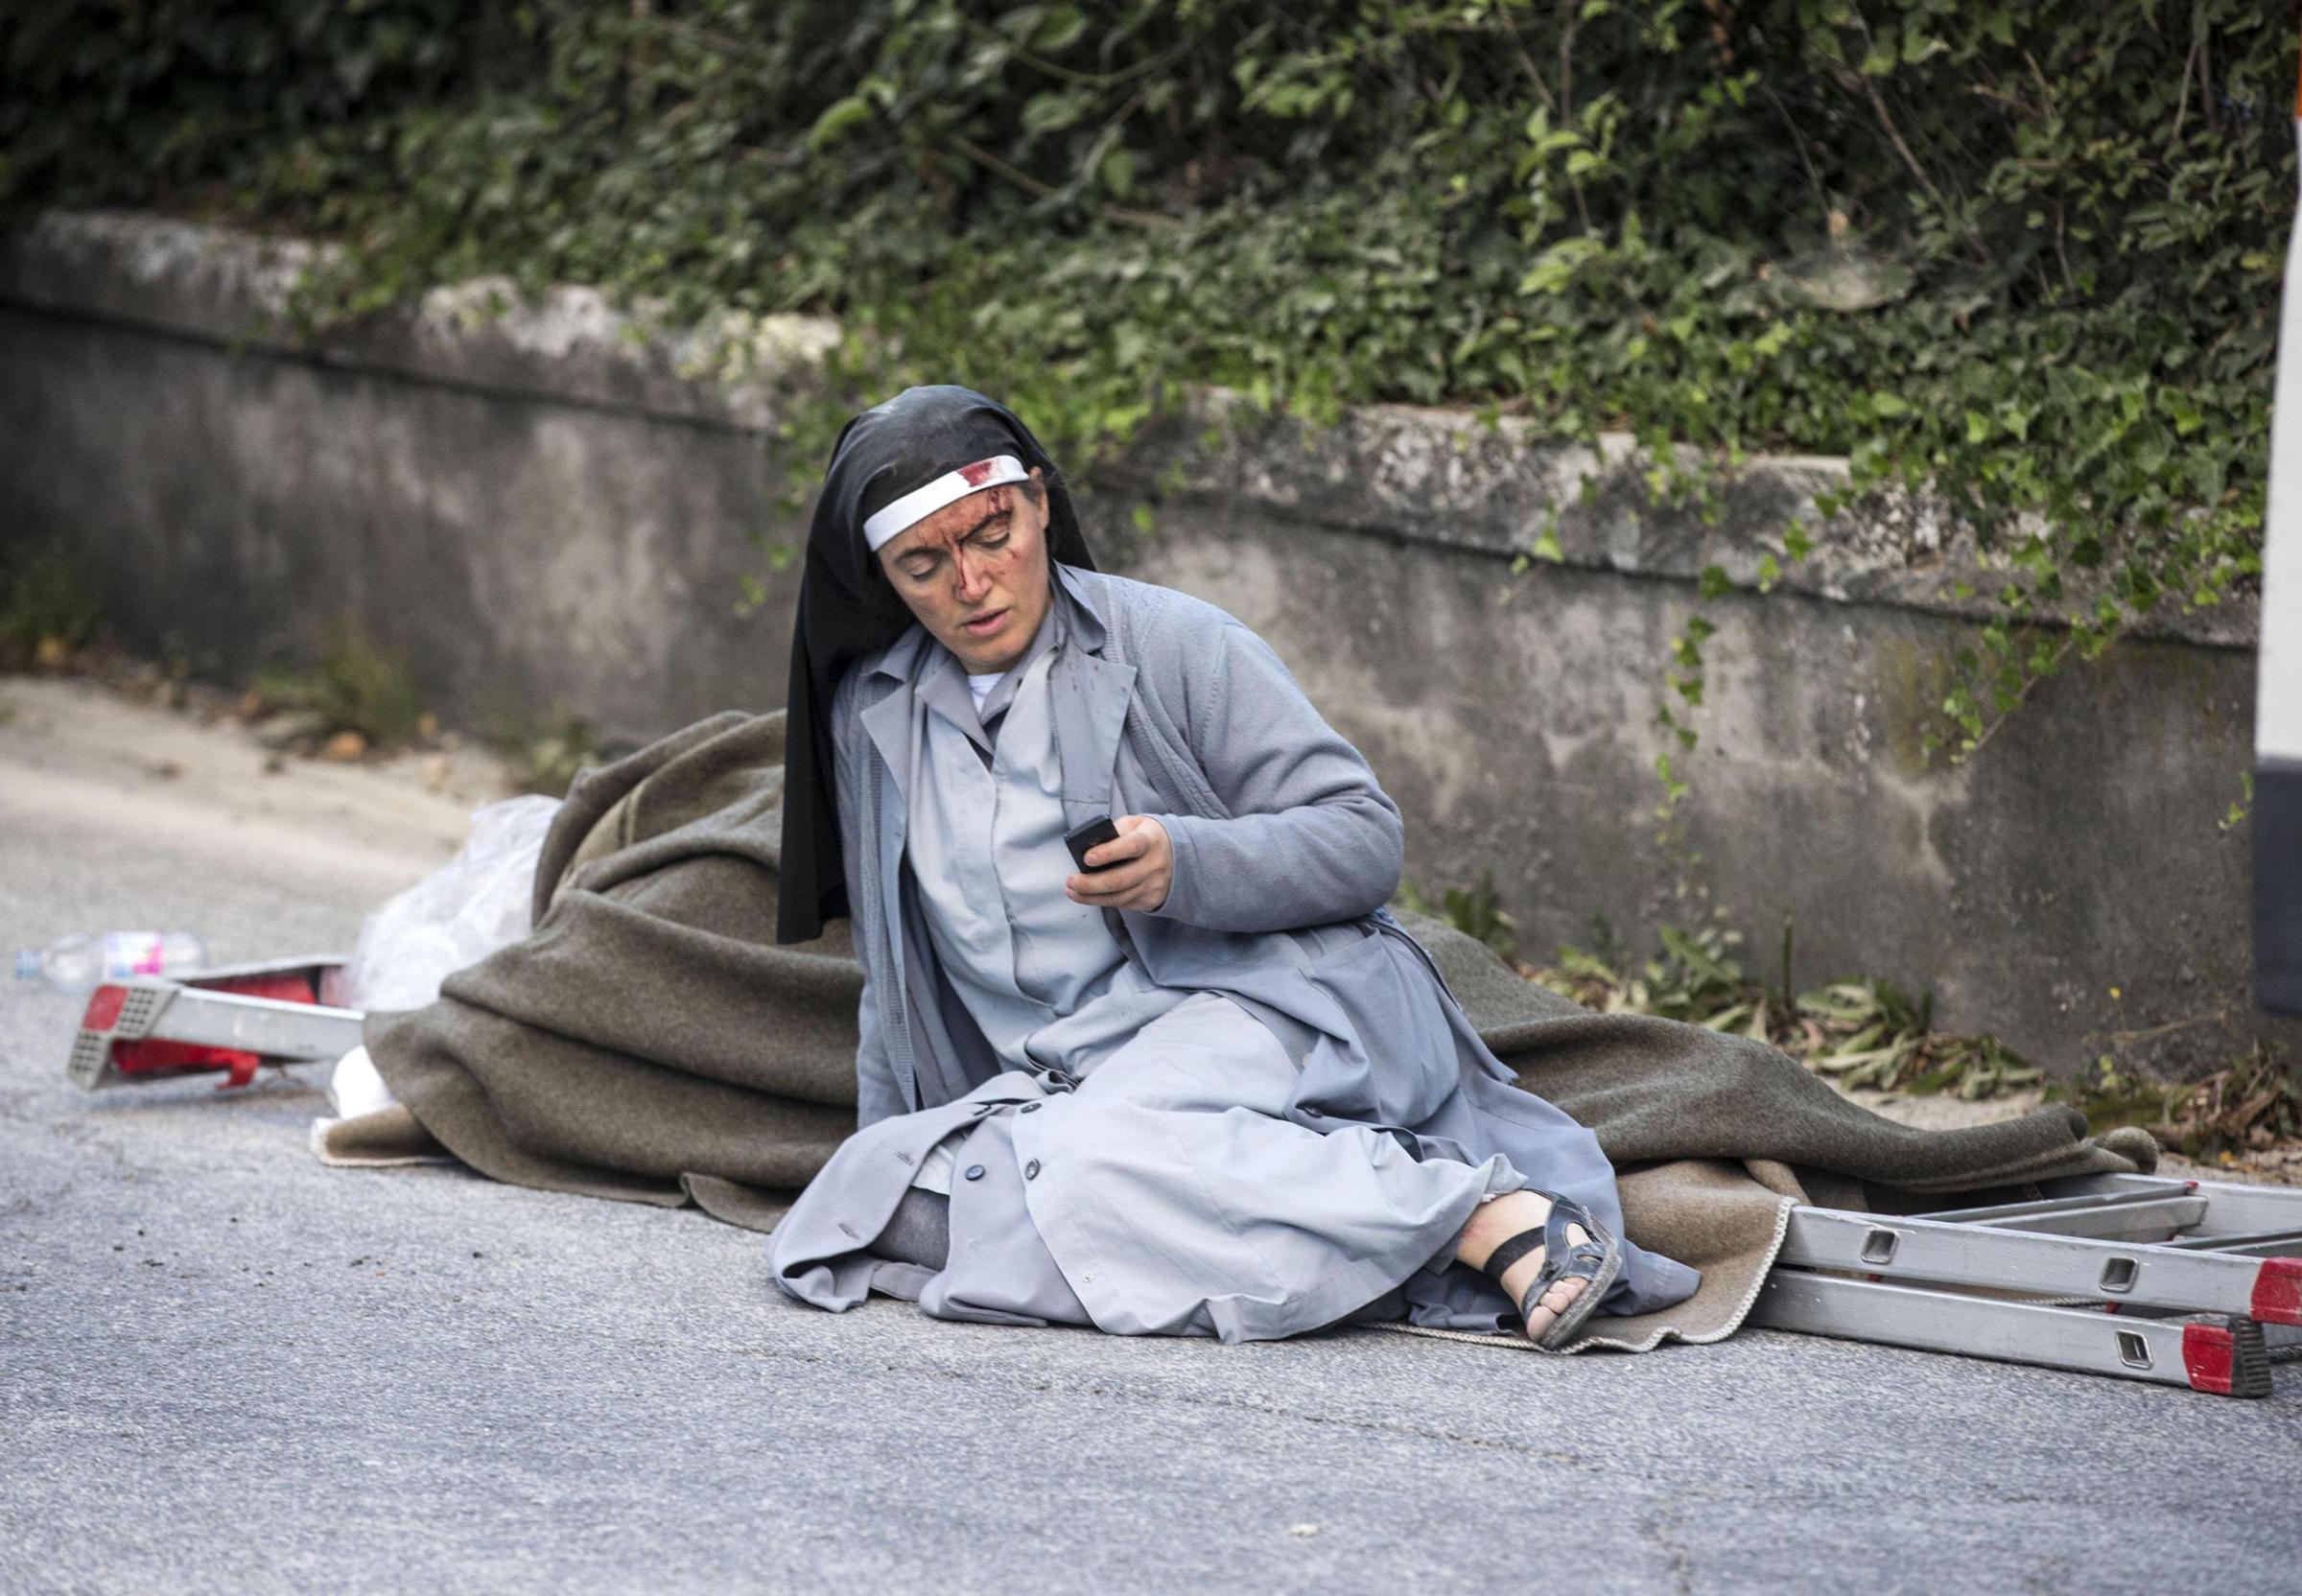 A nun checks her mobile phone as she lies near a victim laid on a ladder following an earthquake in Amatrice Italy, Aug. 24, 2016.